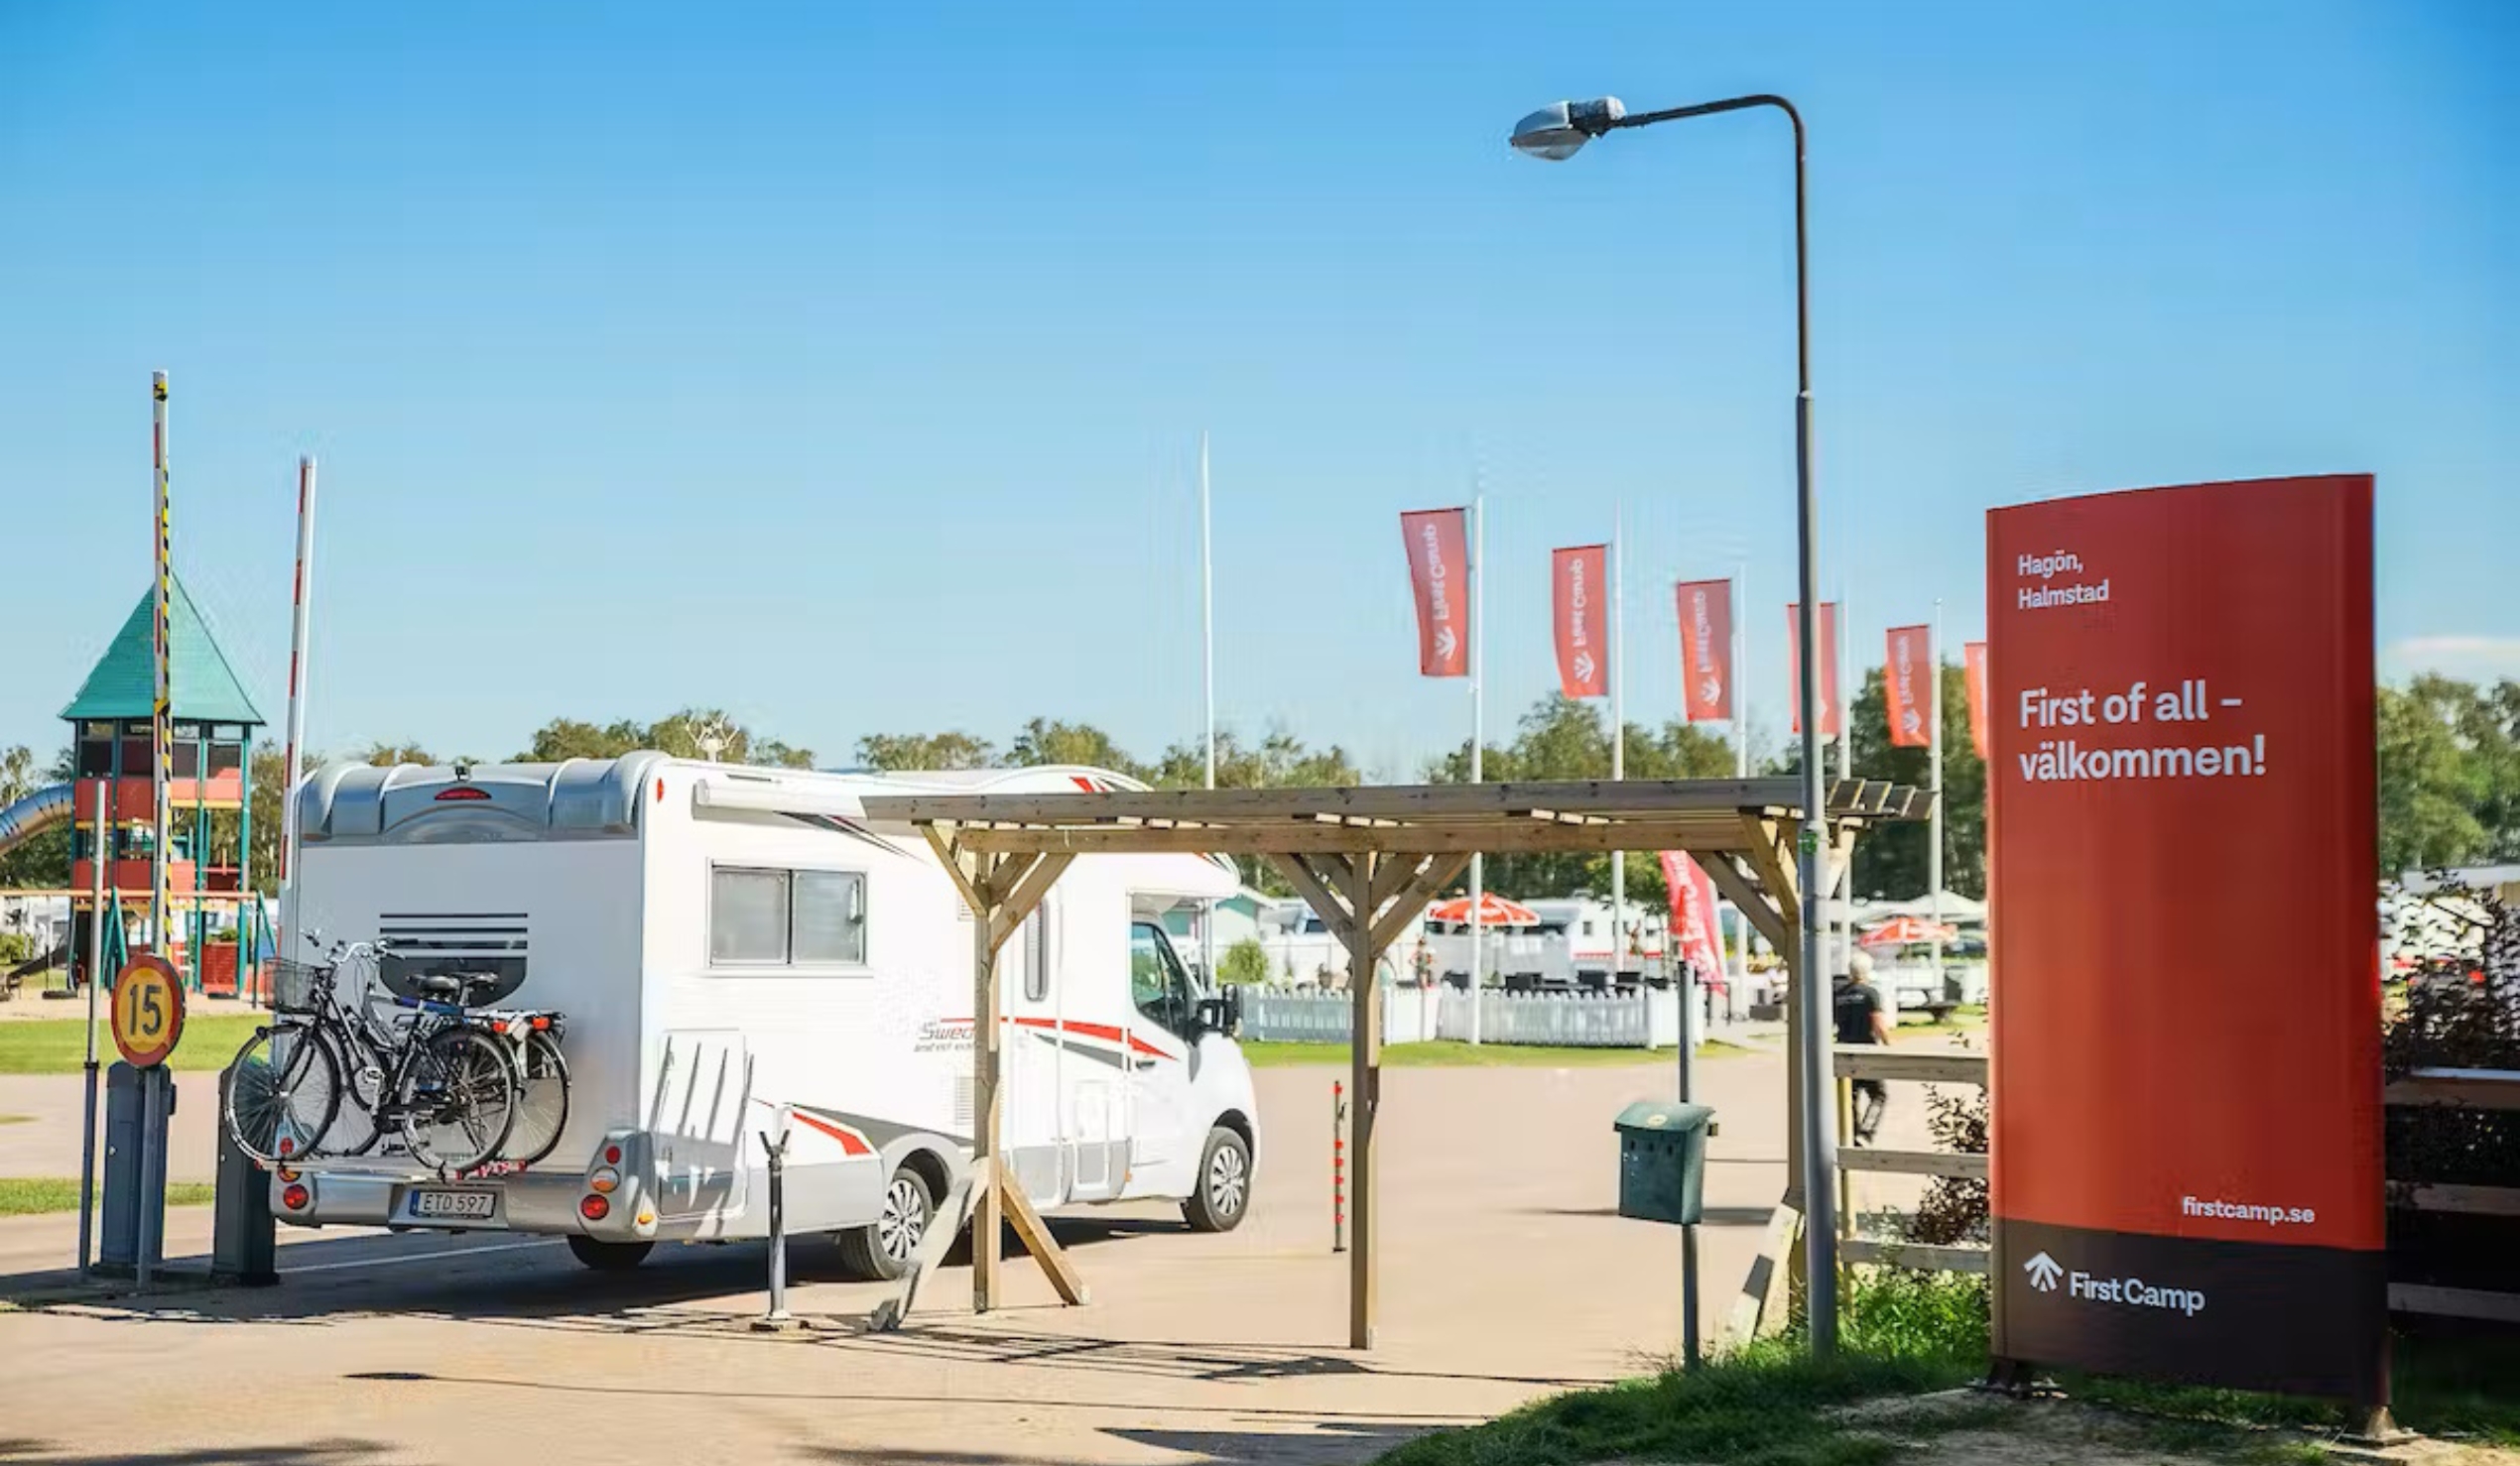 First Camp Hagön - Halmstad is a popular campsite for holidaymakers. 